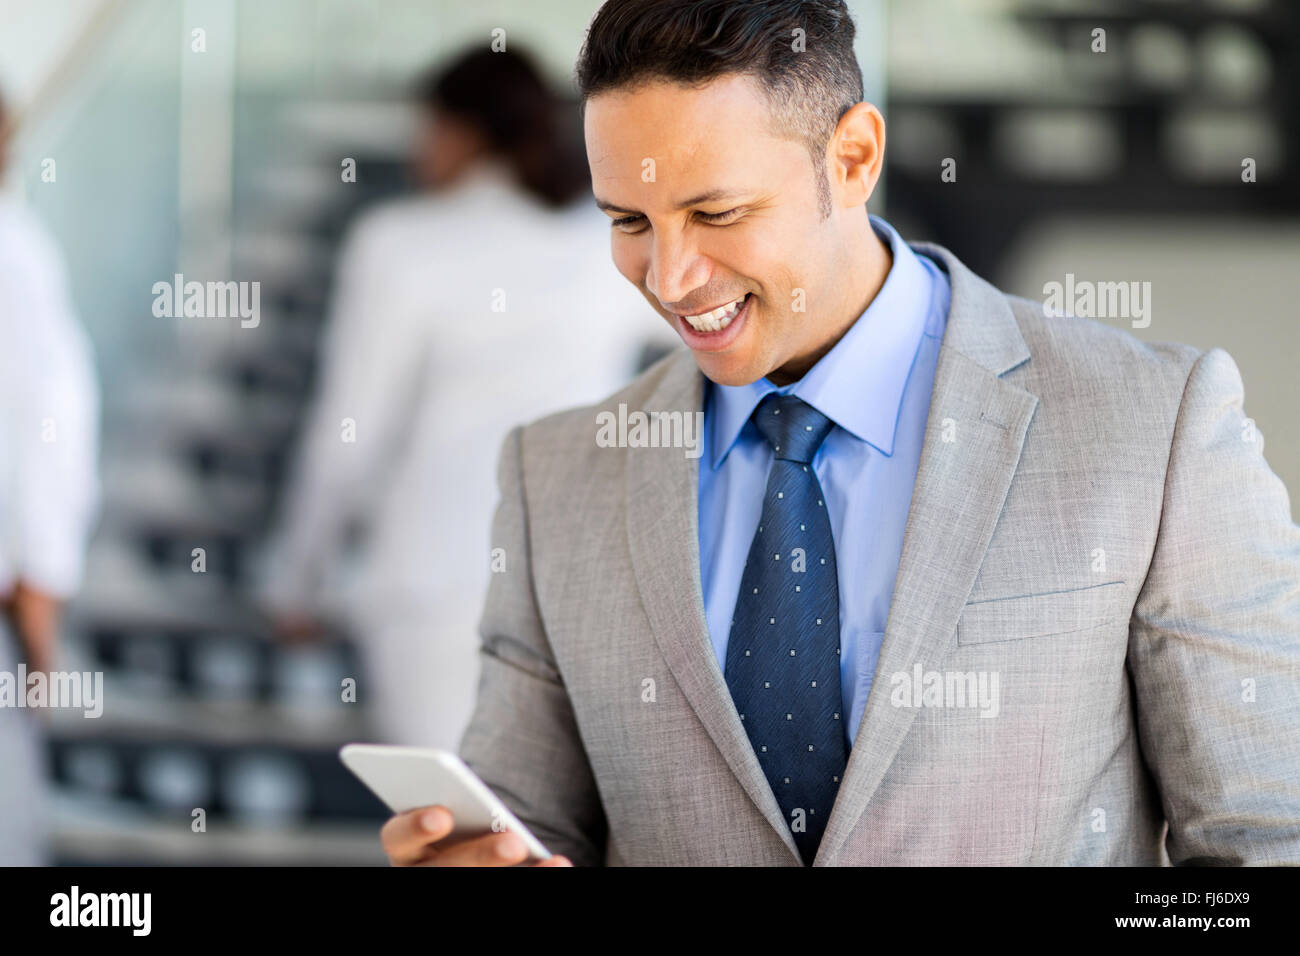 professional businessman using smart phone in office Stock Photo